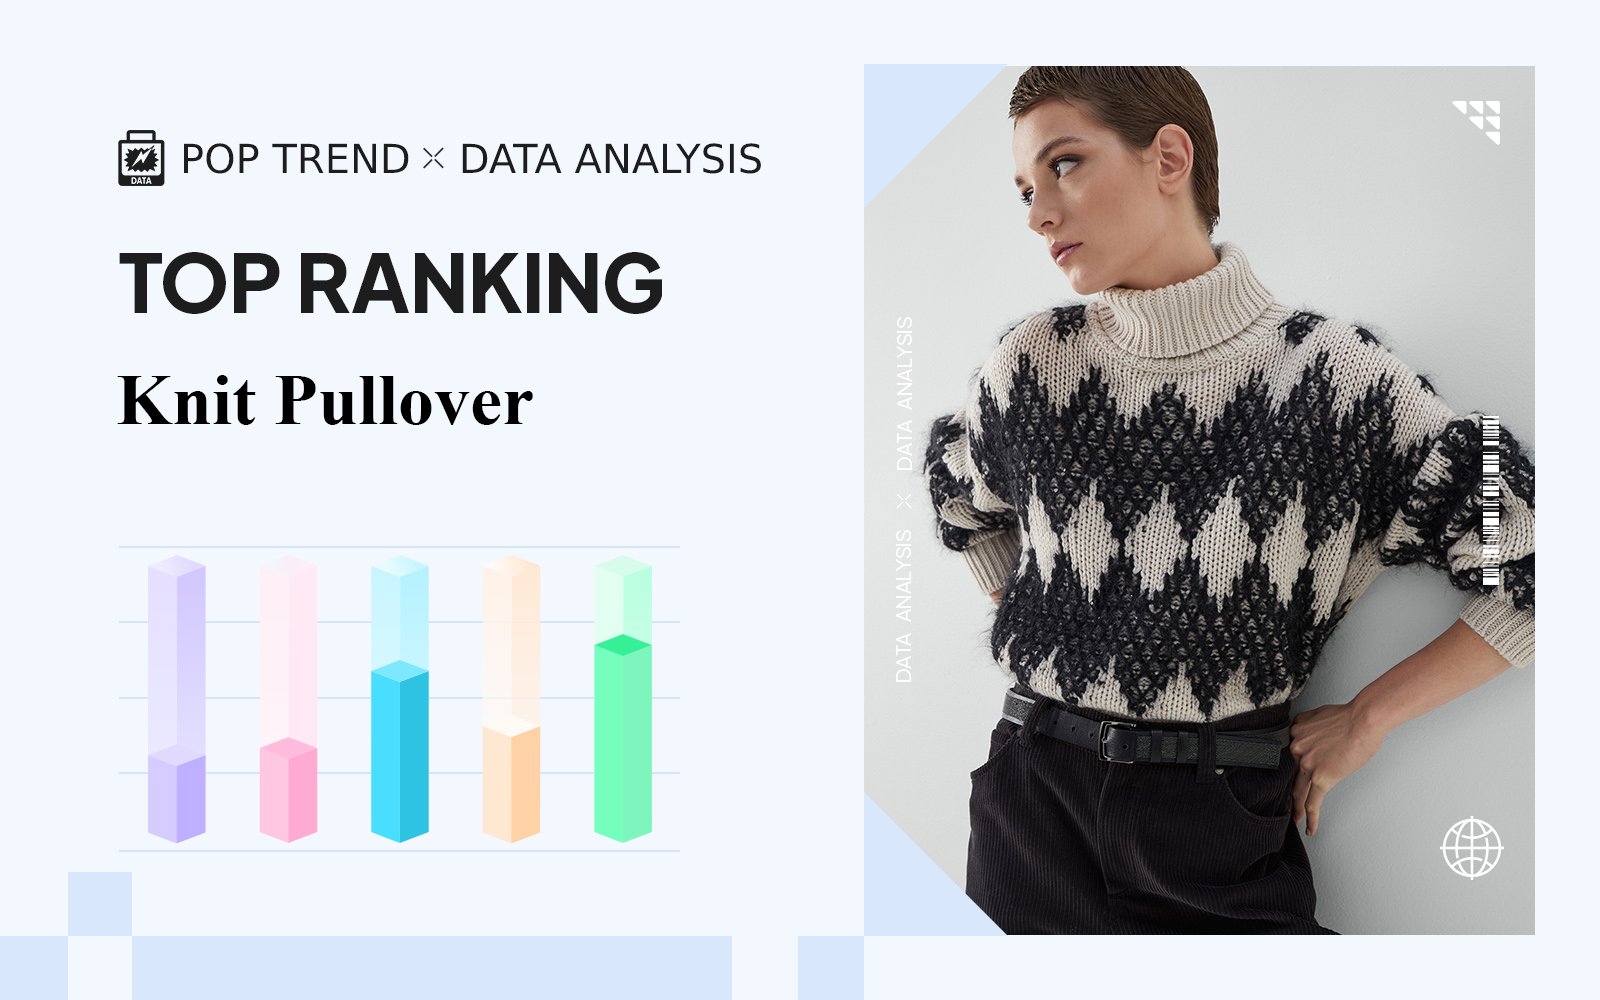 The TOP Ranking of Women's Knitwear in October